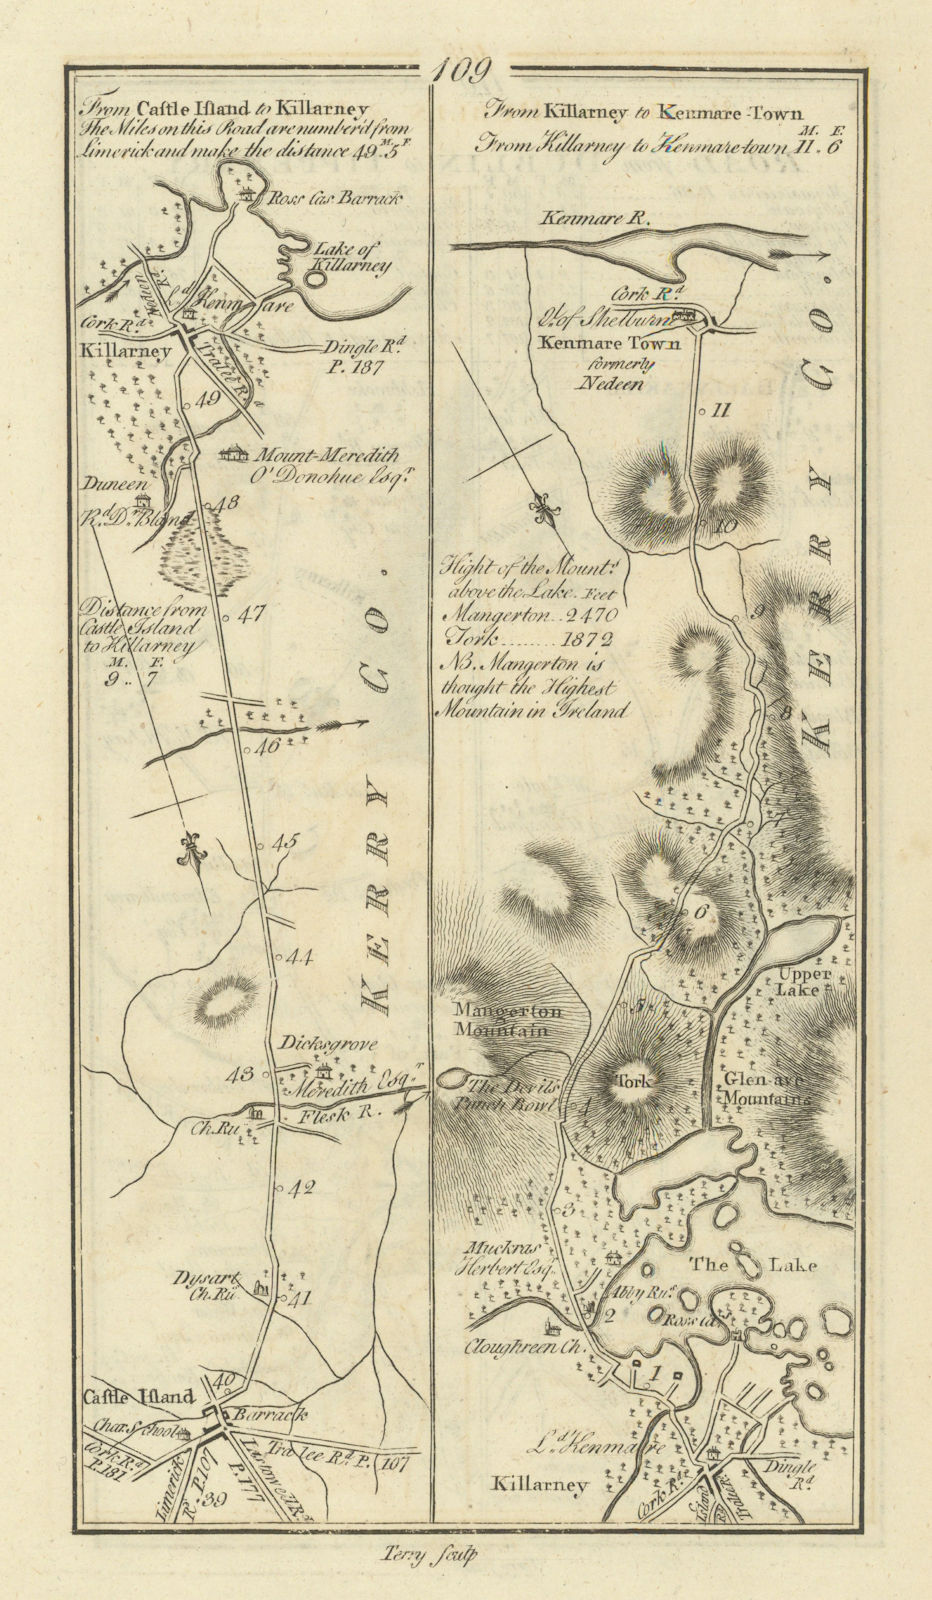 Associate Product #109 Castleisland to Killarney & Kenmare Town. Kerry. TAYLOR/SKINNER 1778 map